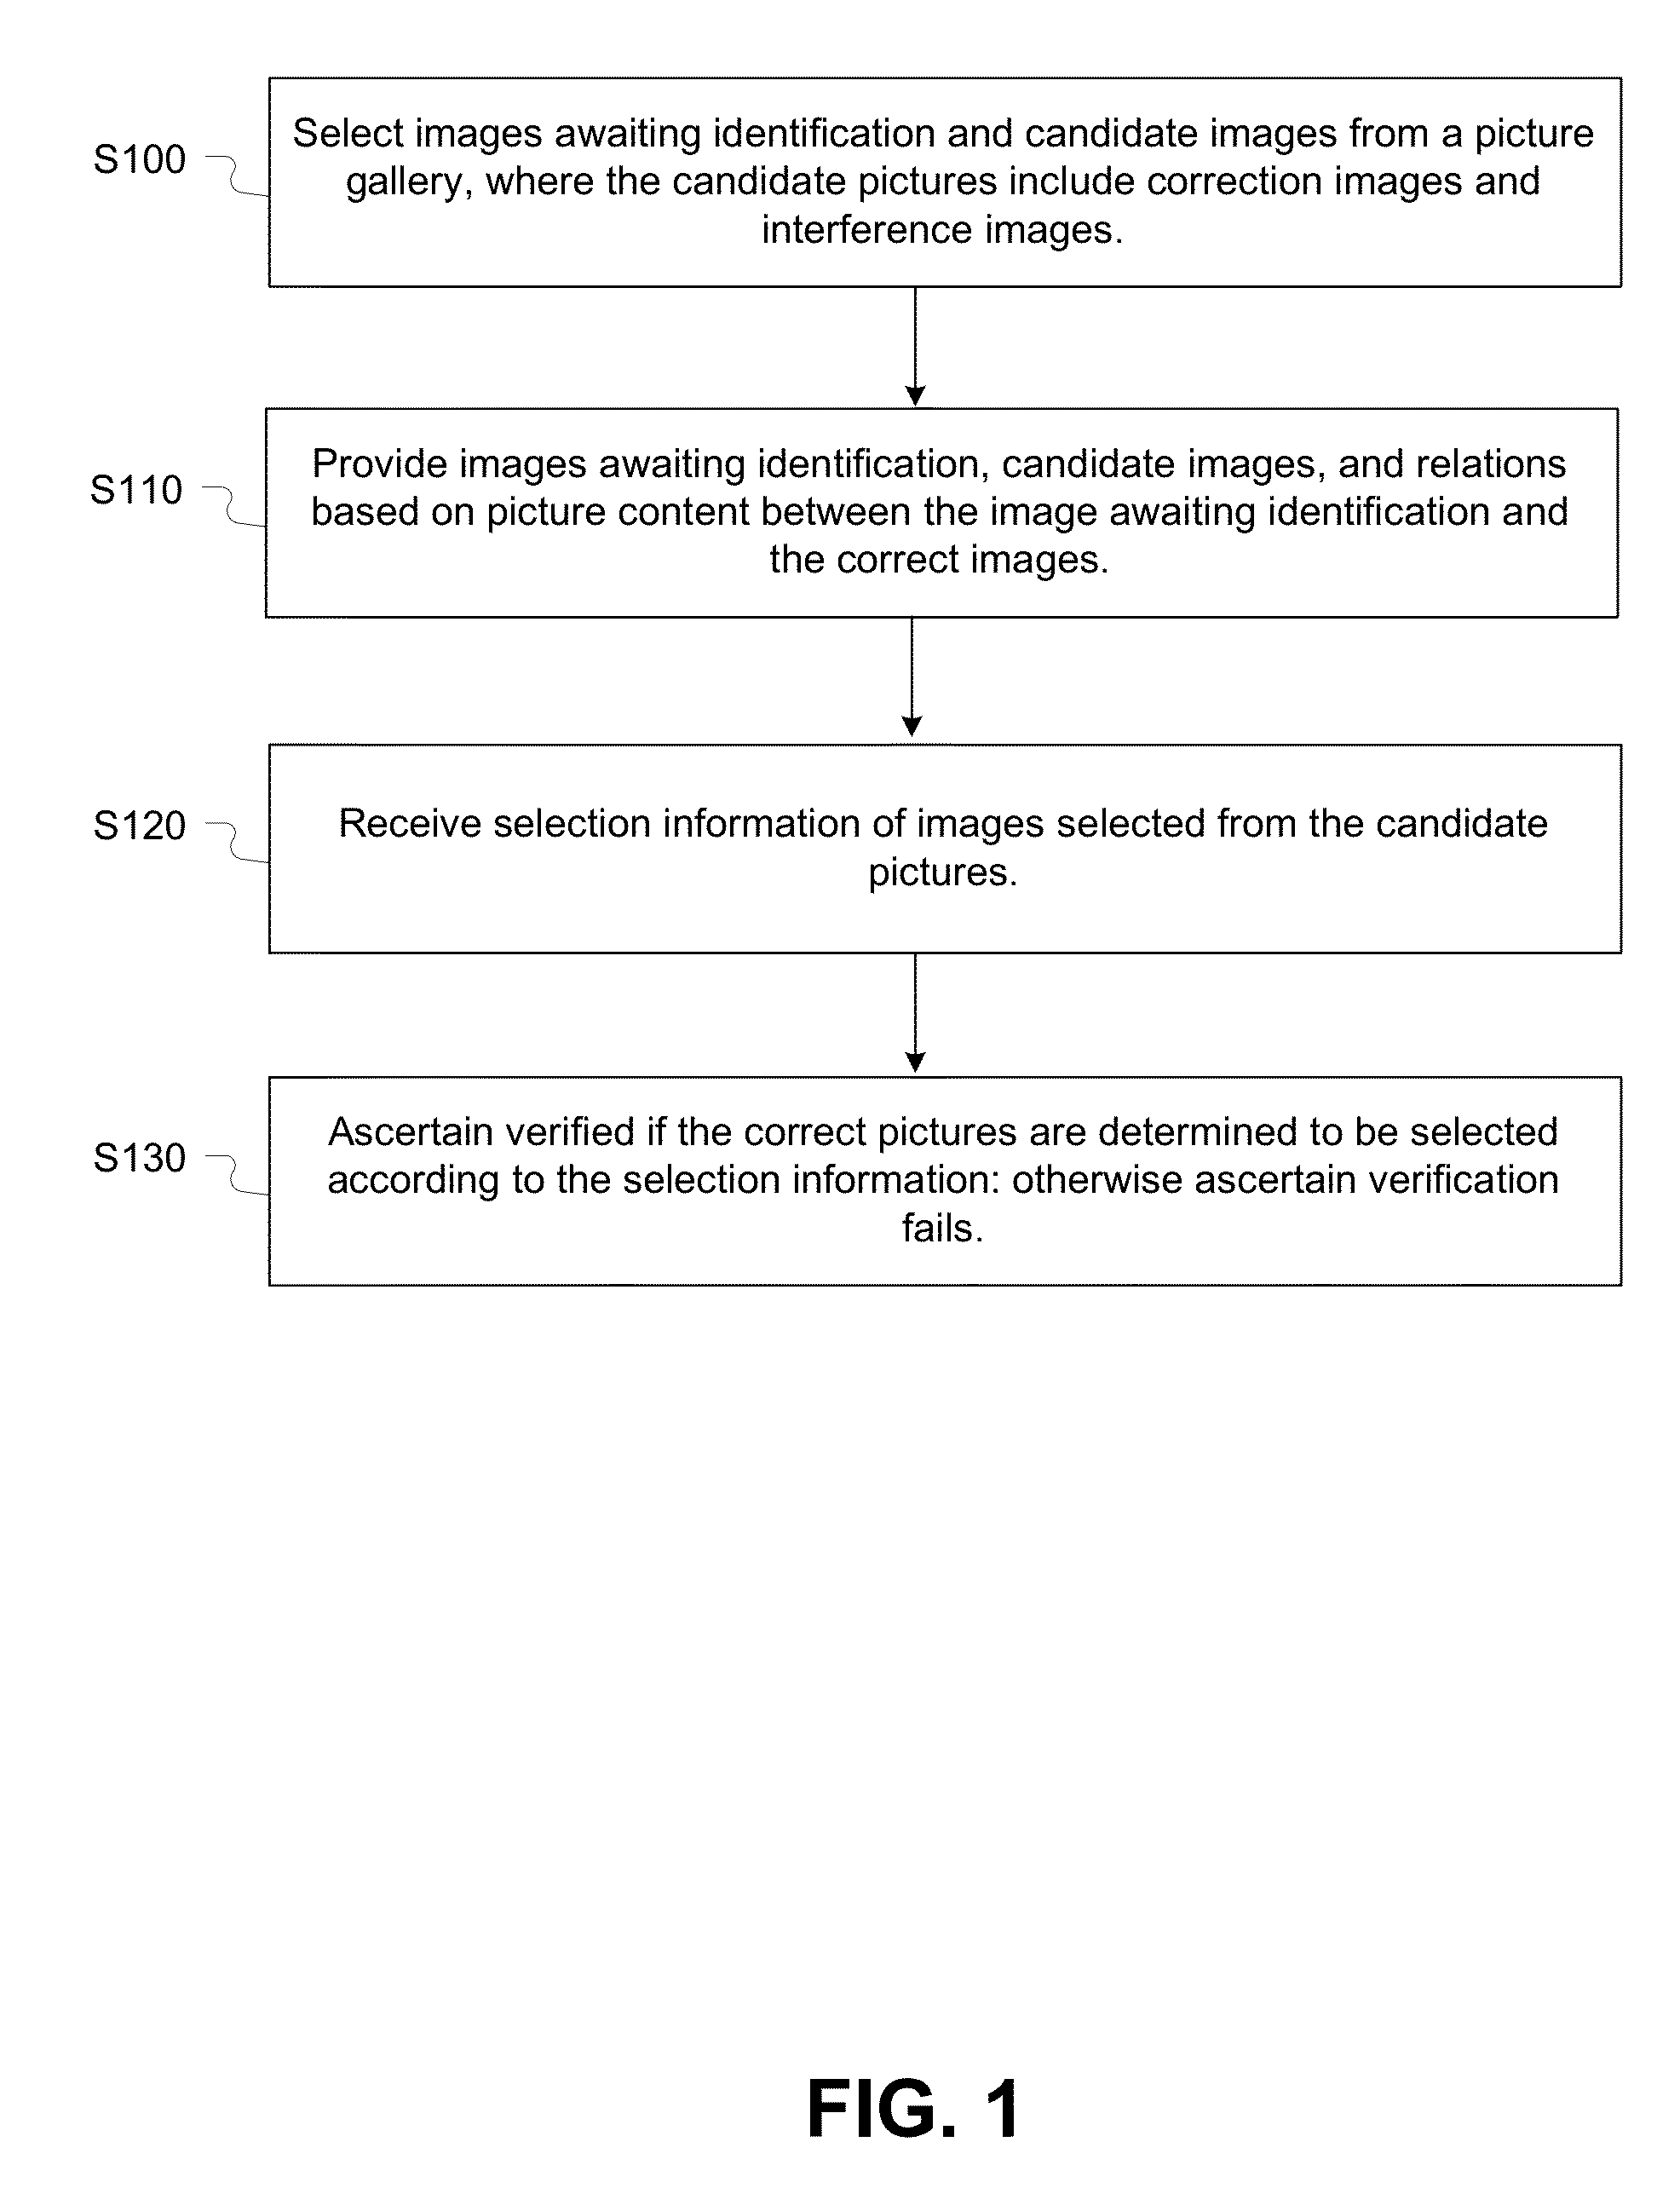 Method and apparatus for verifying images based on image verification codes